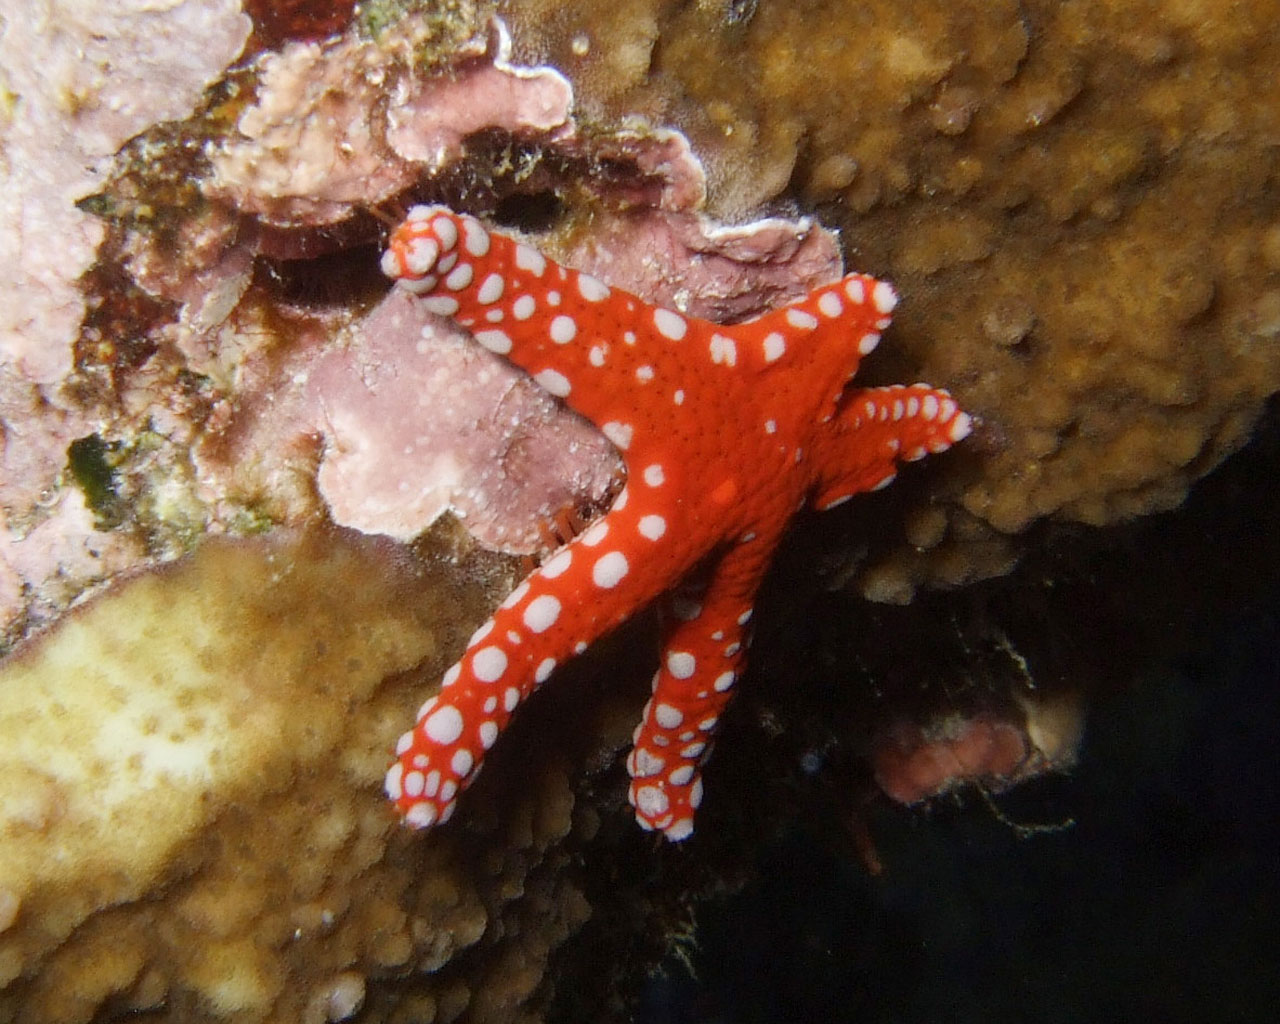 Sea star fish of bright red color with white dots